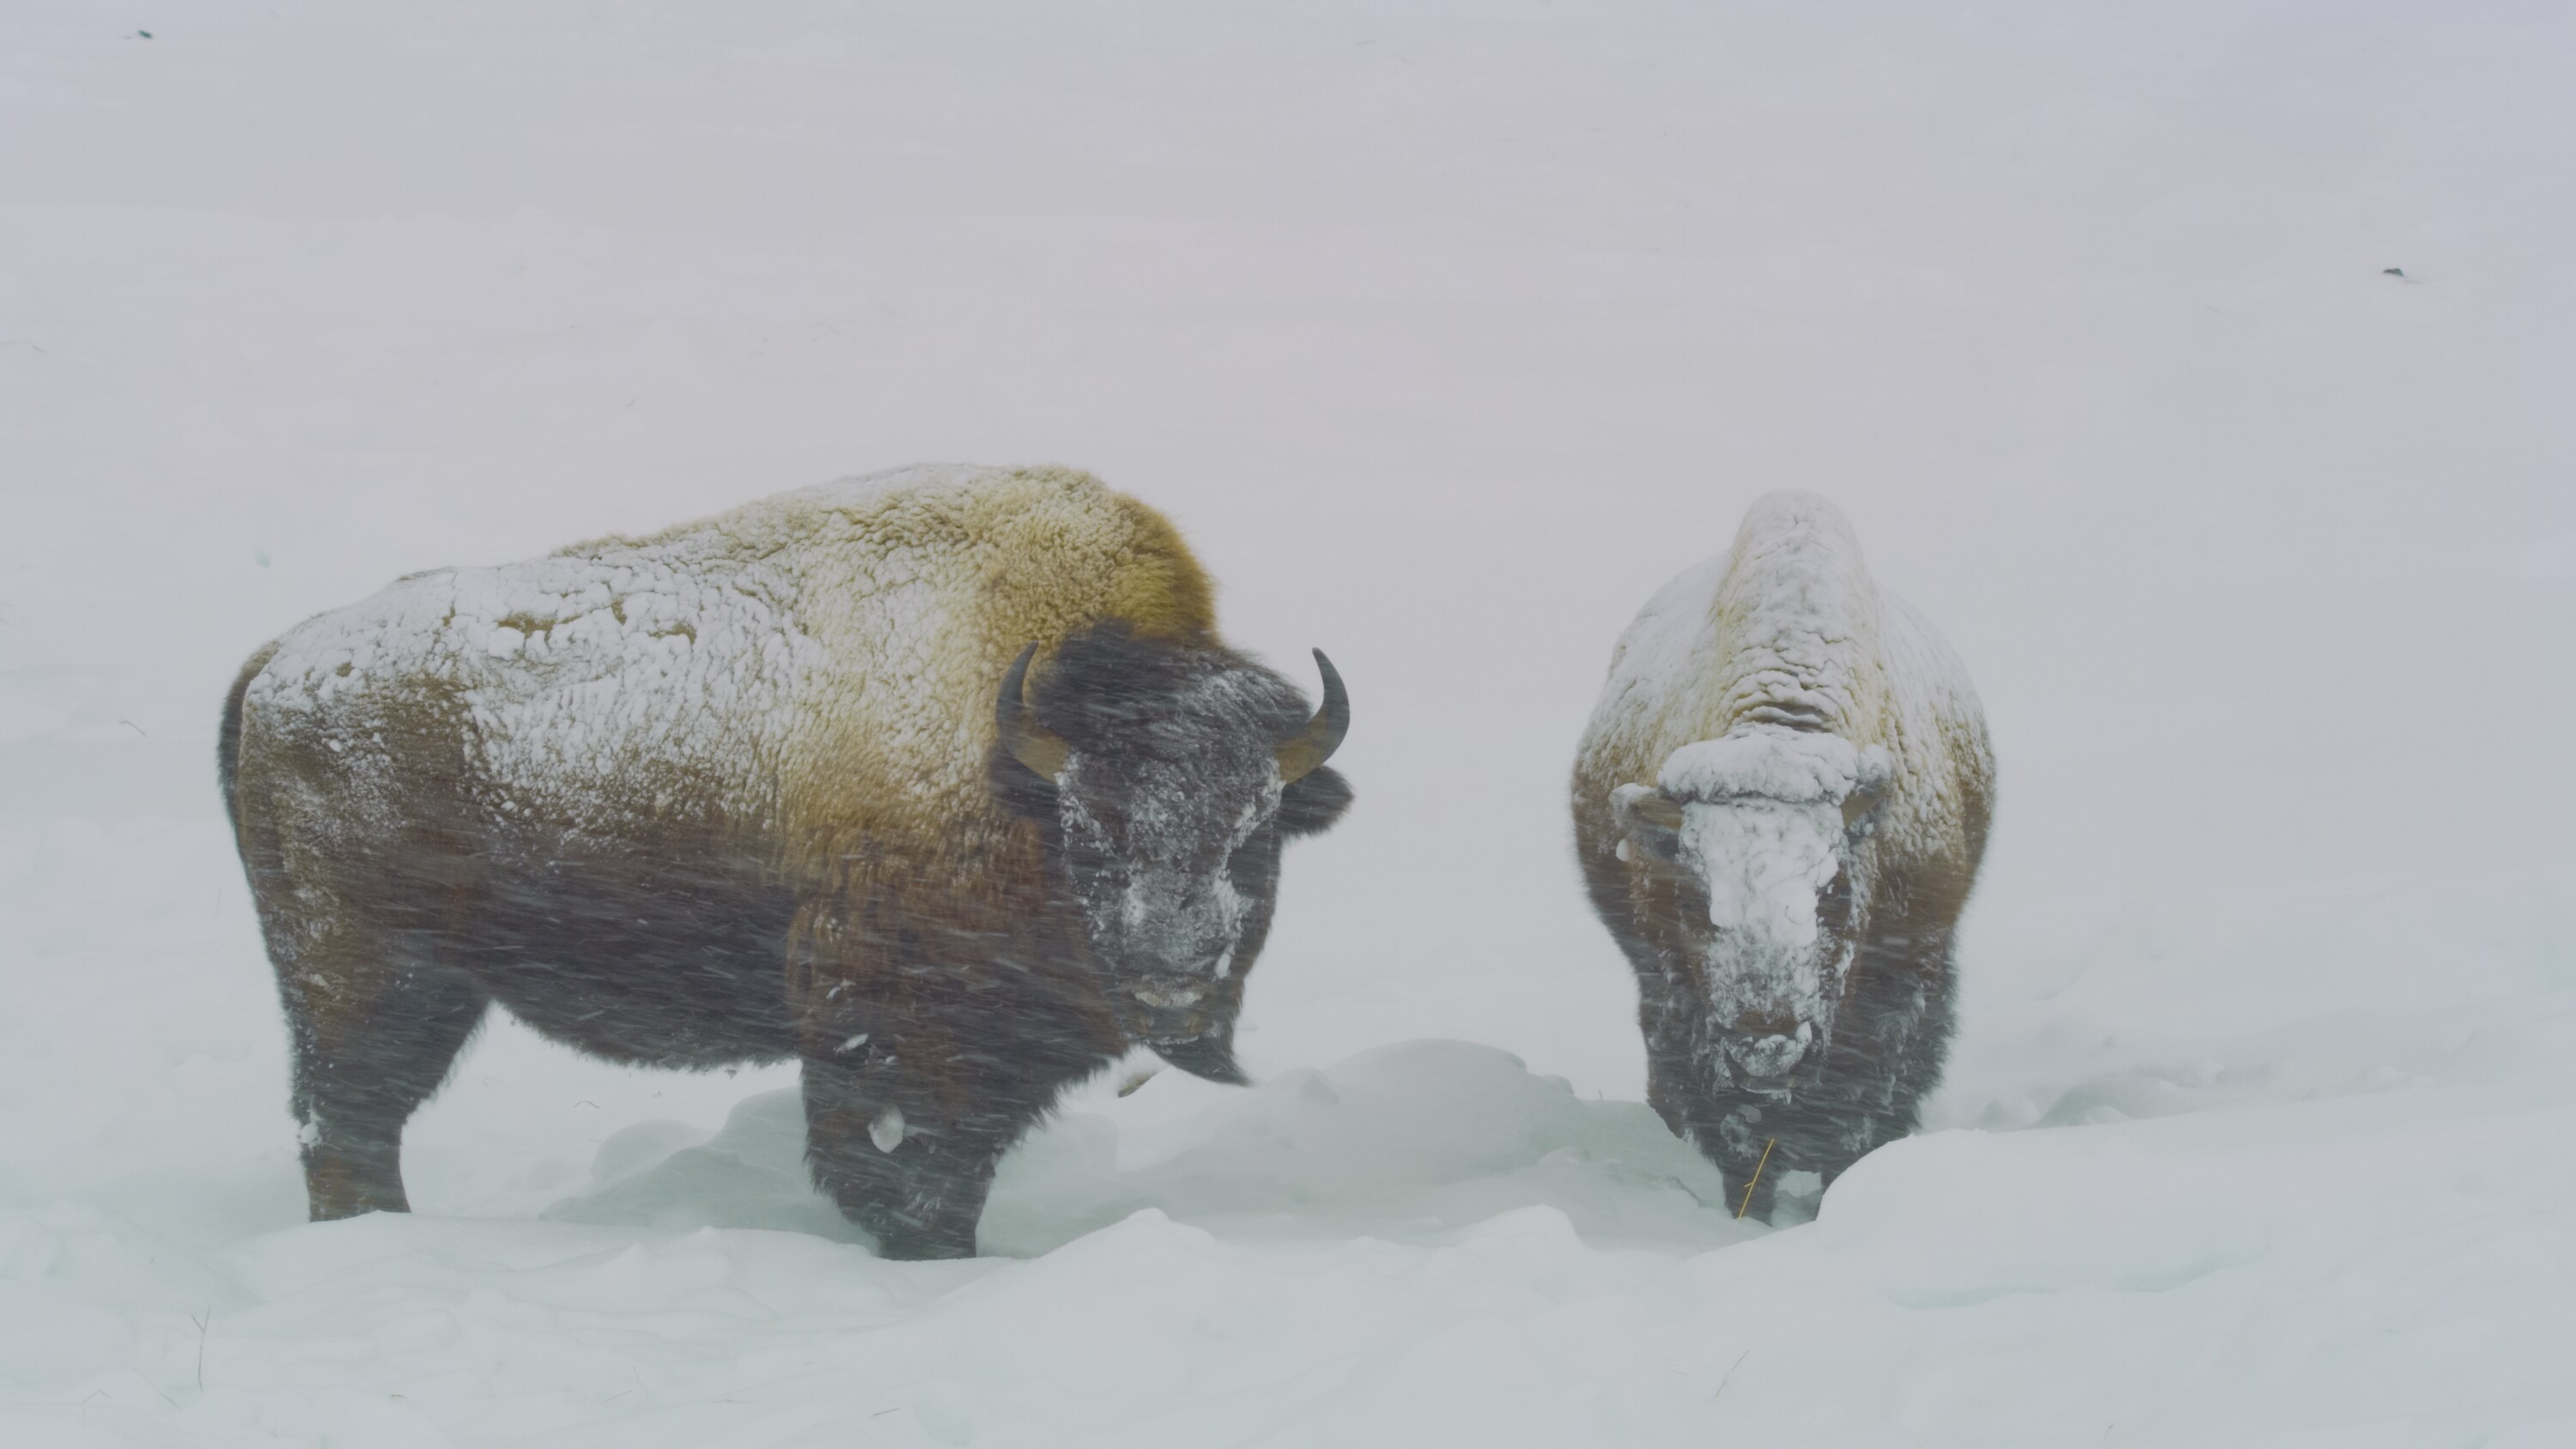 A pair of American bison standing in a blizzard. (National Geographic for Disney+)